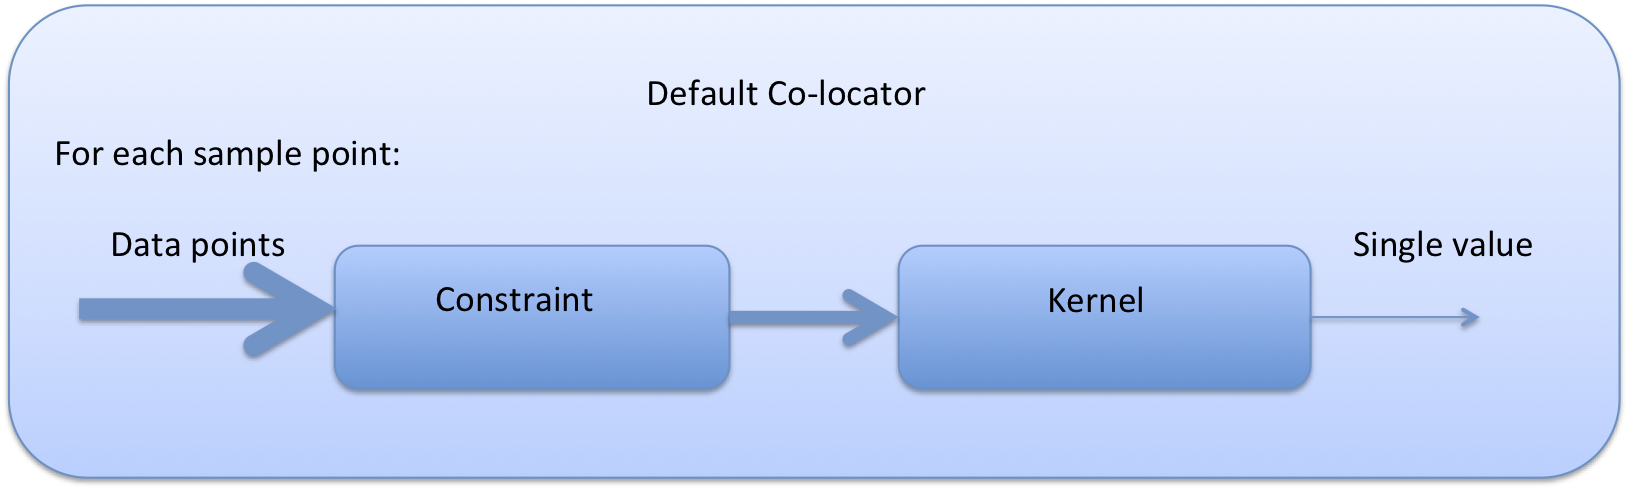 _images/ColocationDiagram.png